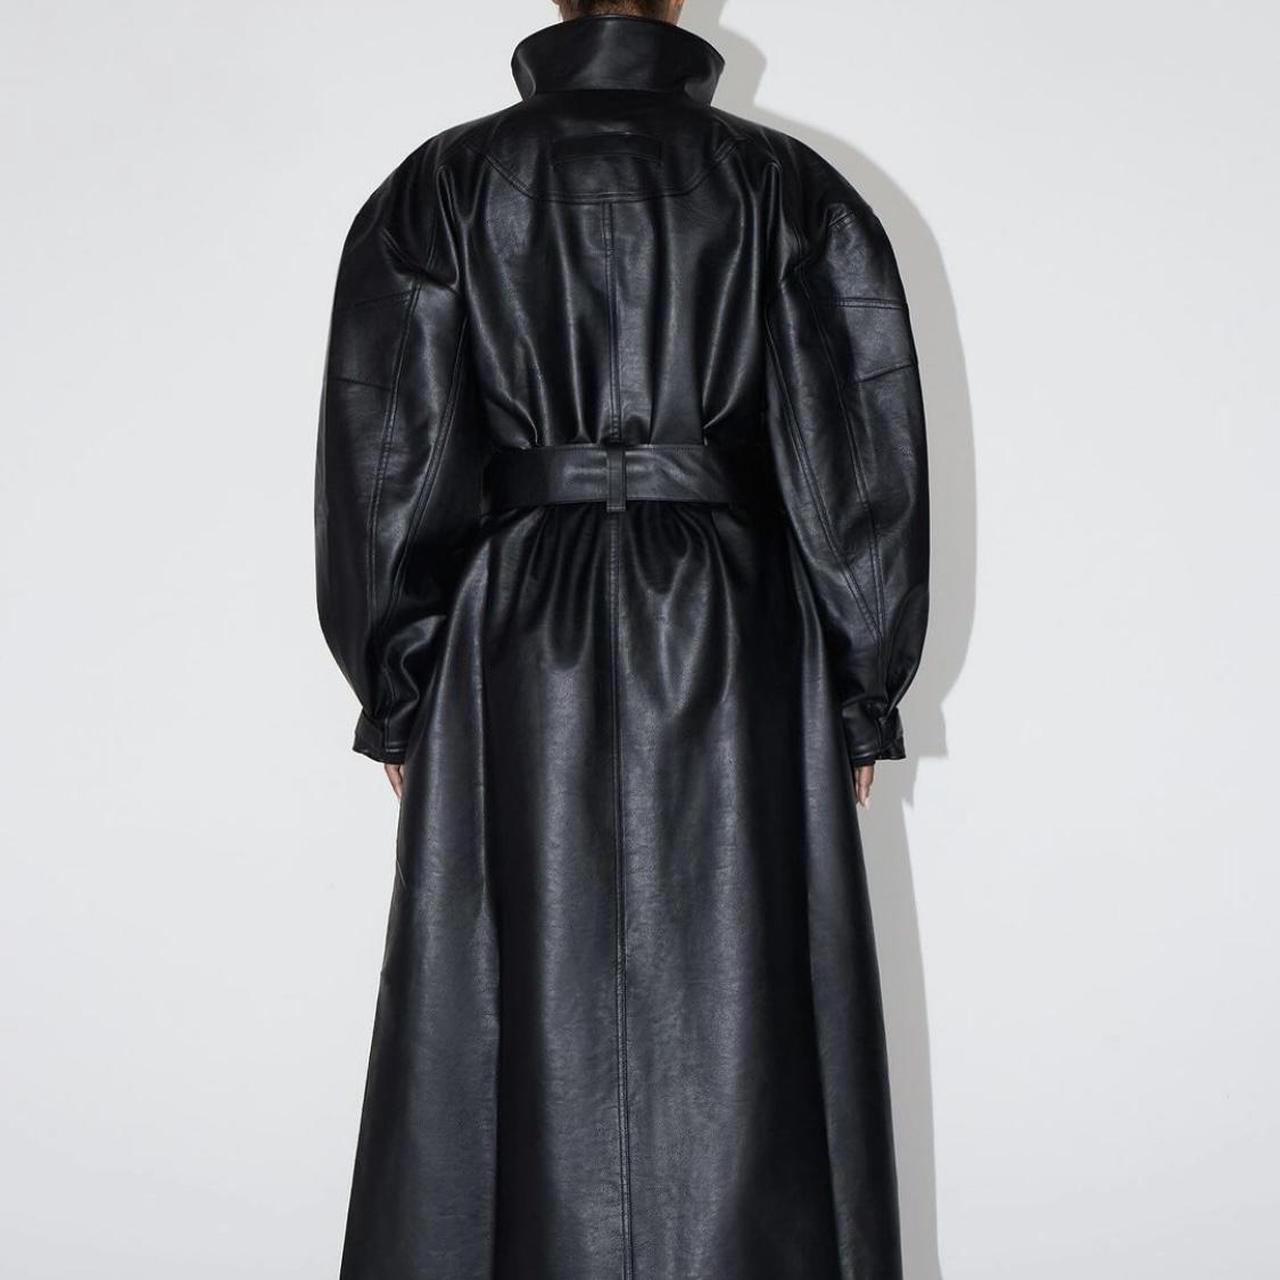 Khy- Faux Leather Trench , Size: M , New (never worn)...